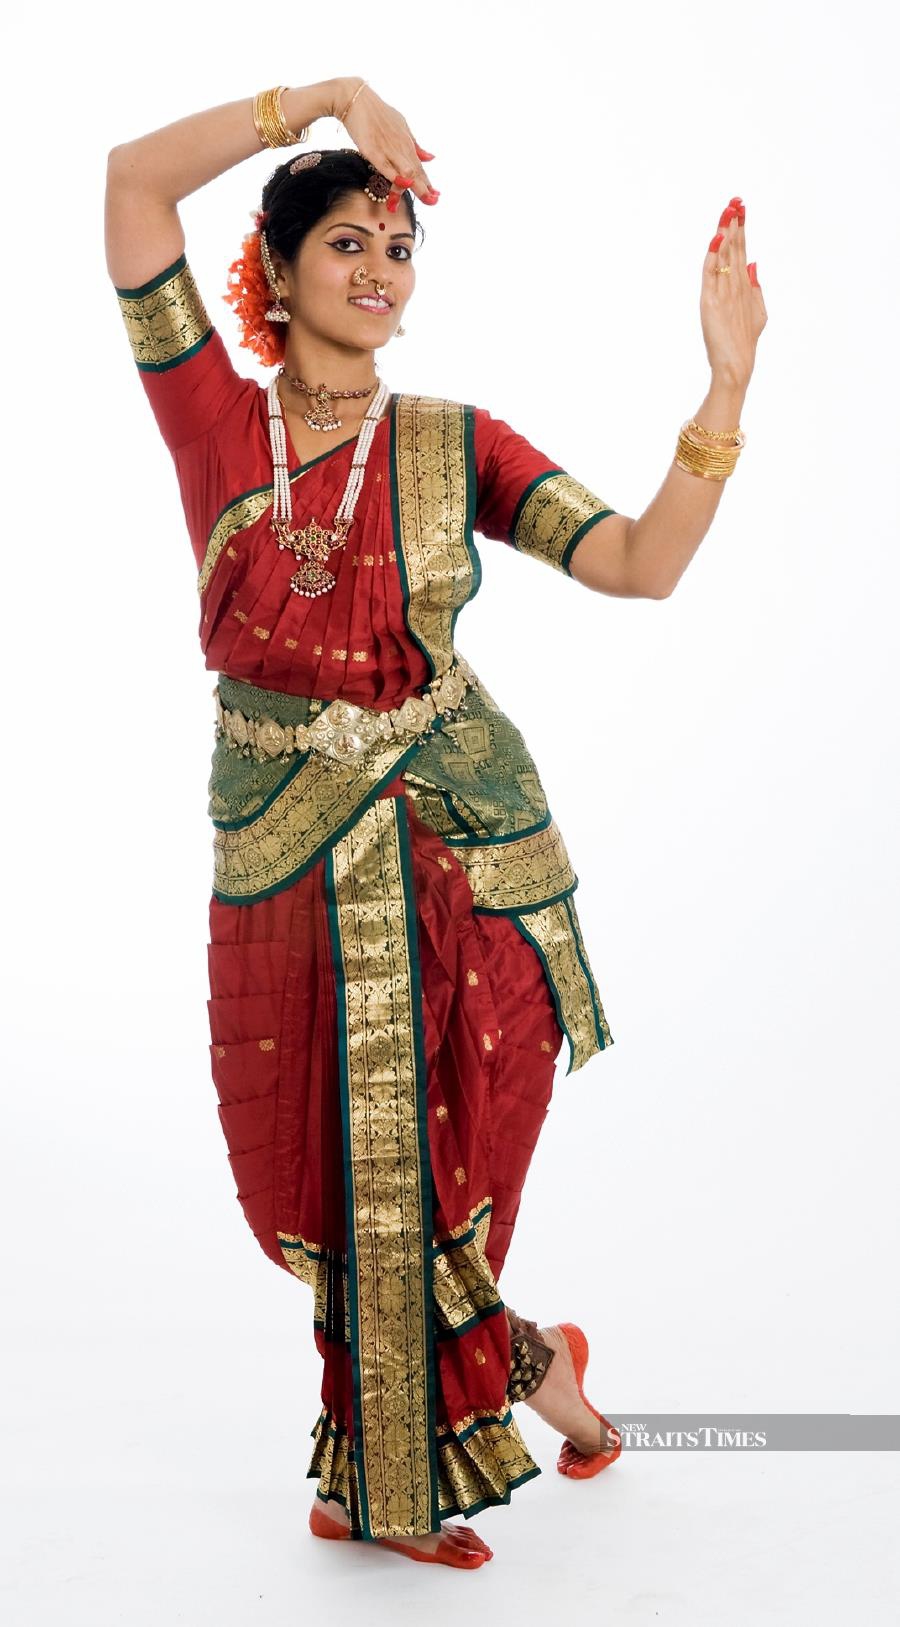  Kavita engaging in Indian dance, a cultural activity that she is passionate about.